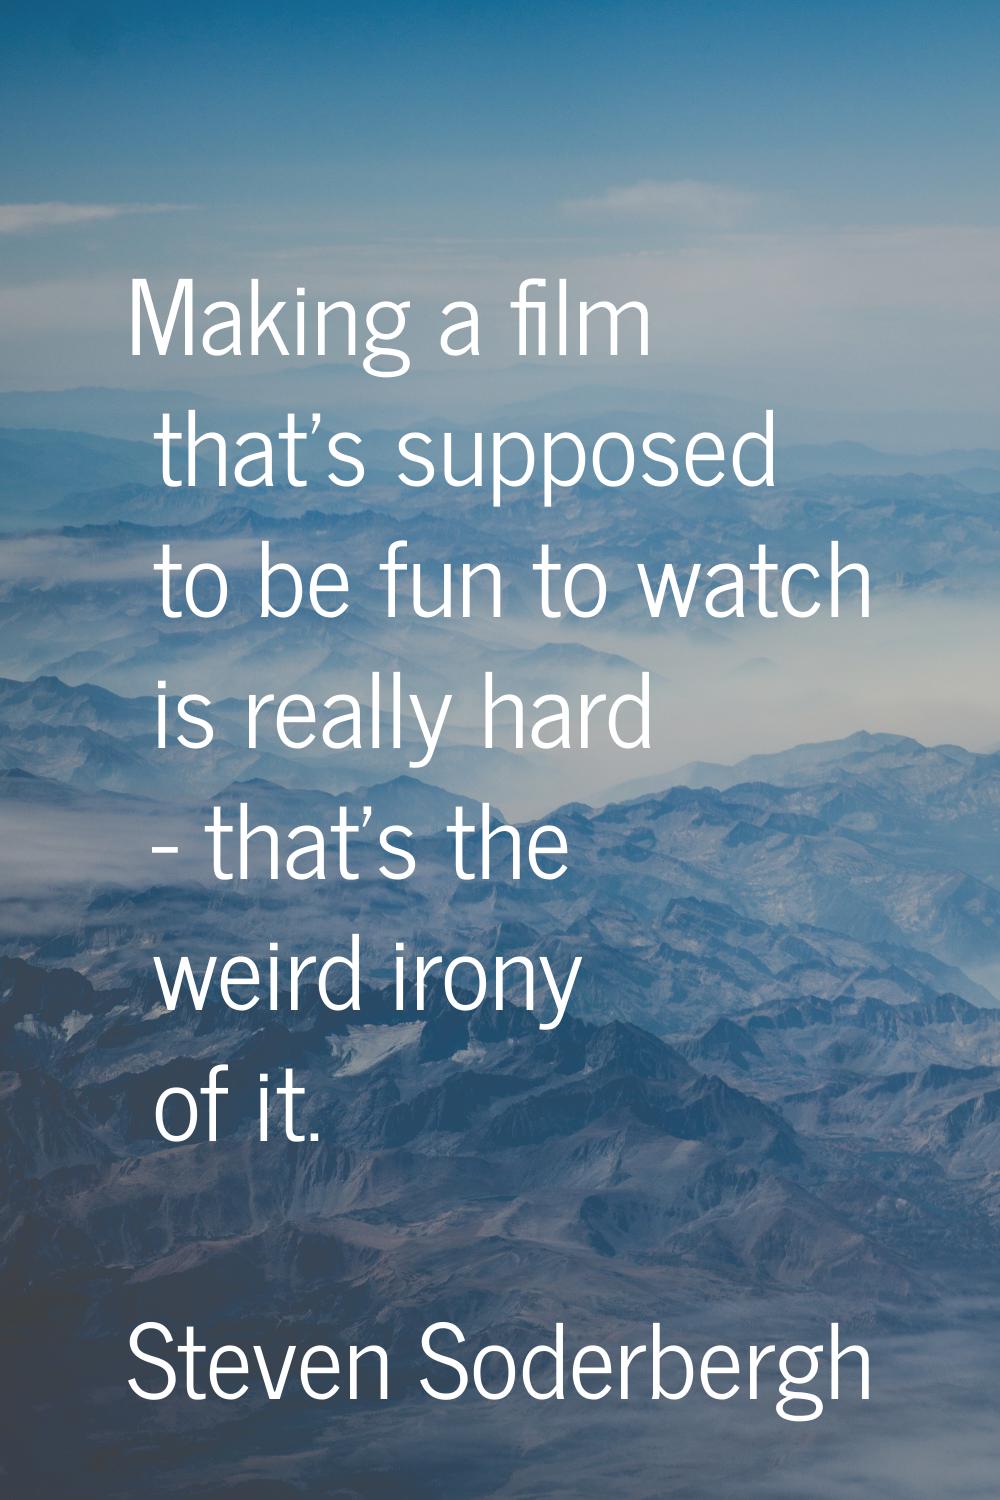 Making a film that's supposed to be fun to watch is really hard - that's the weird irony of it.